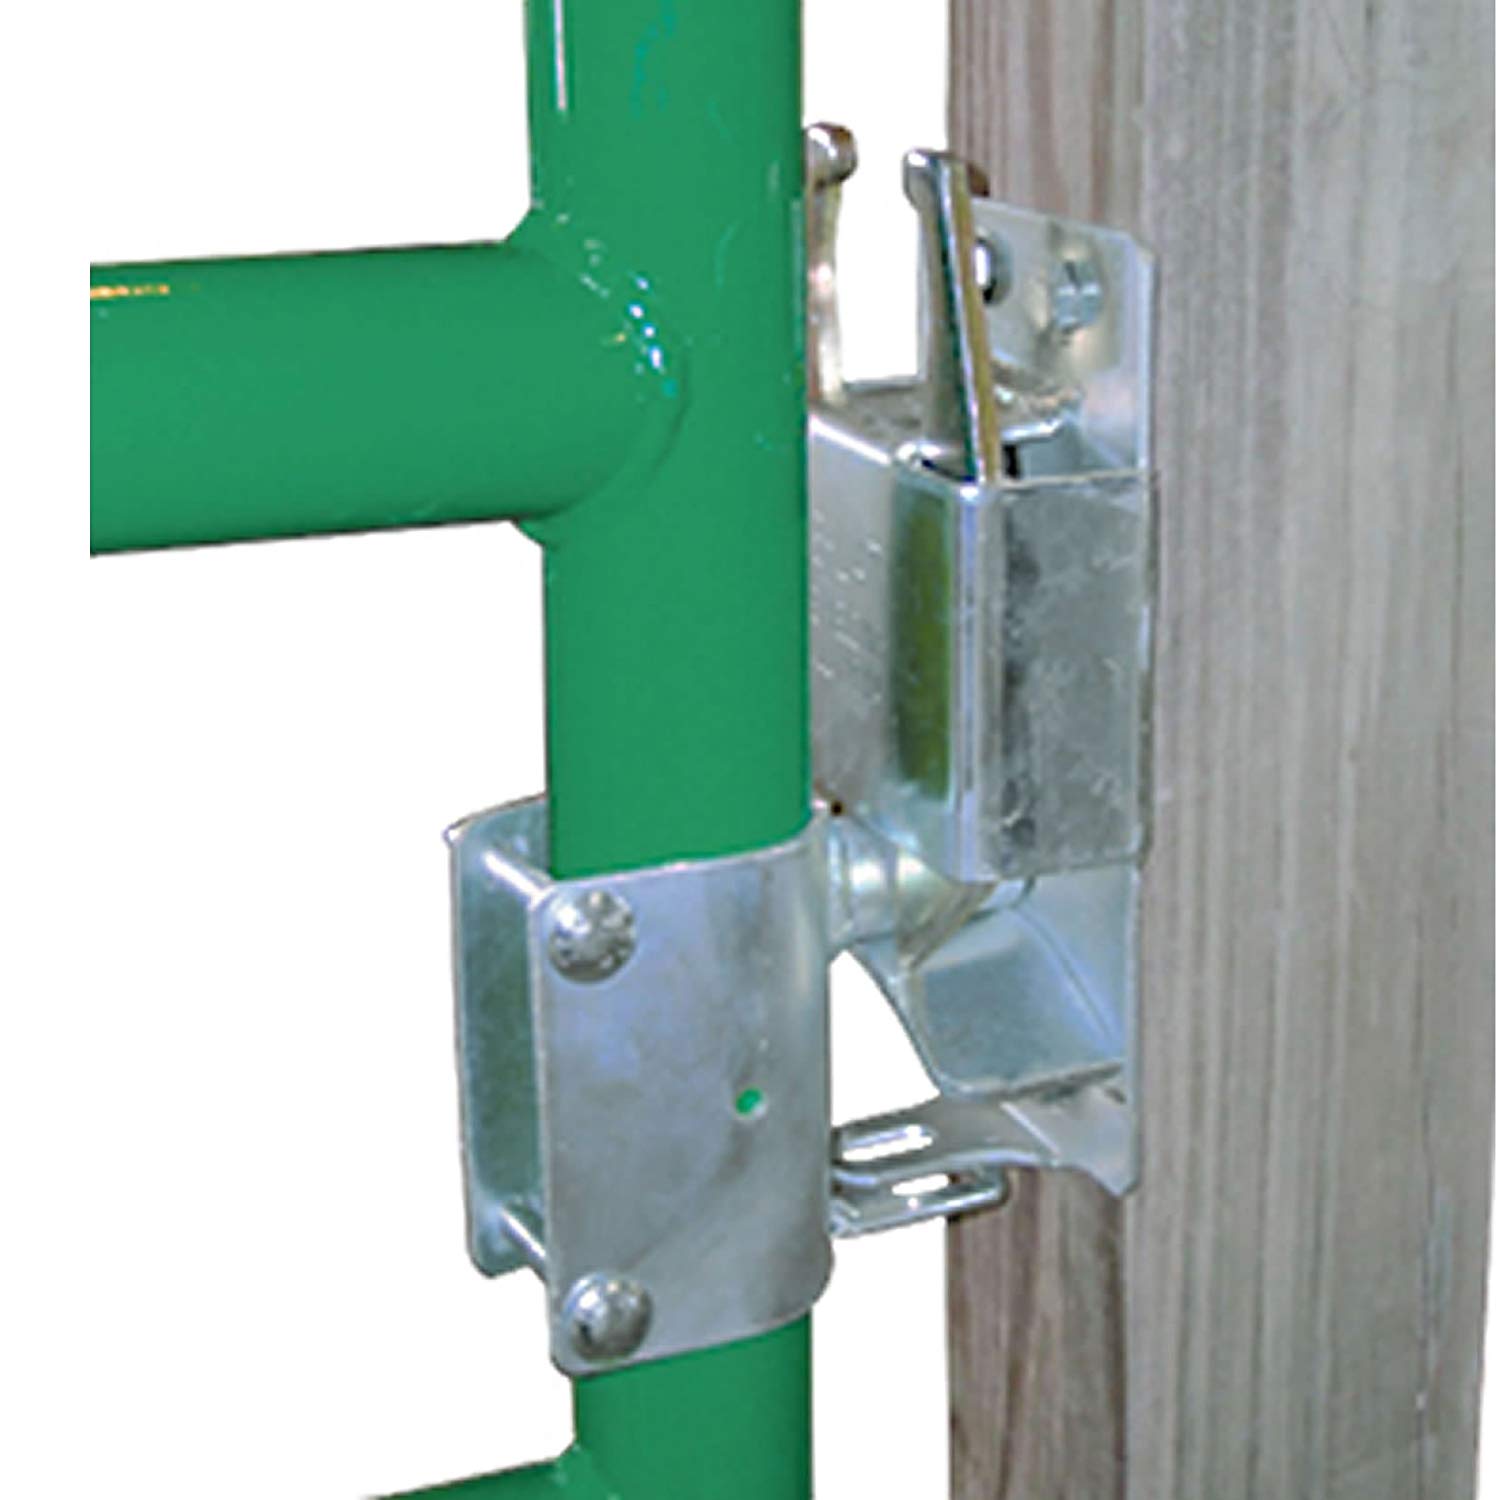 Fireplace Gate for Baby Proofing Lovely Co Line Lockable 2 Way Livestock Gate Latch